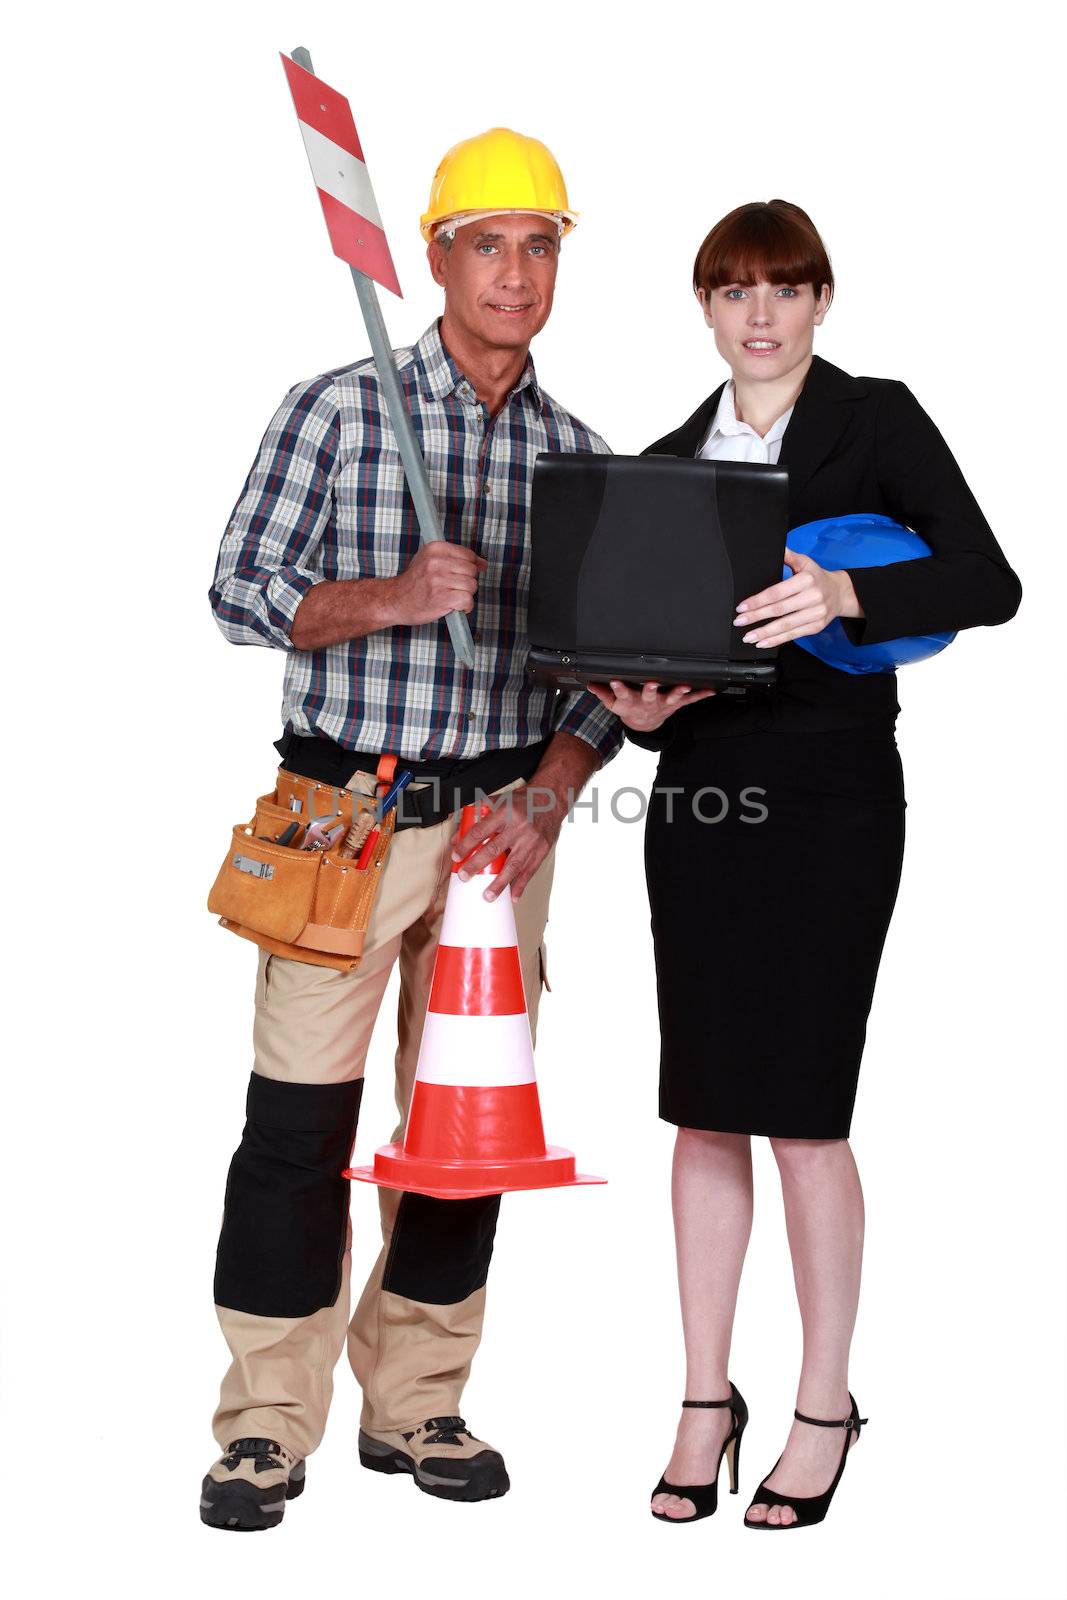 businesswoman and road worker posing together